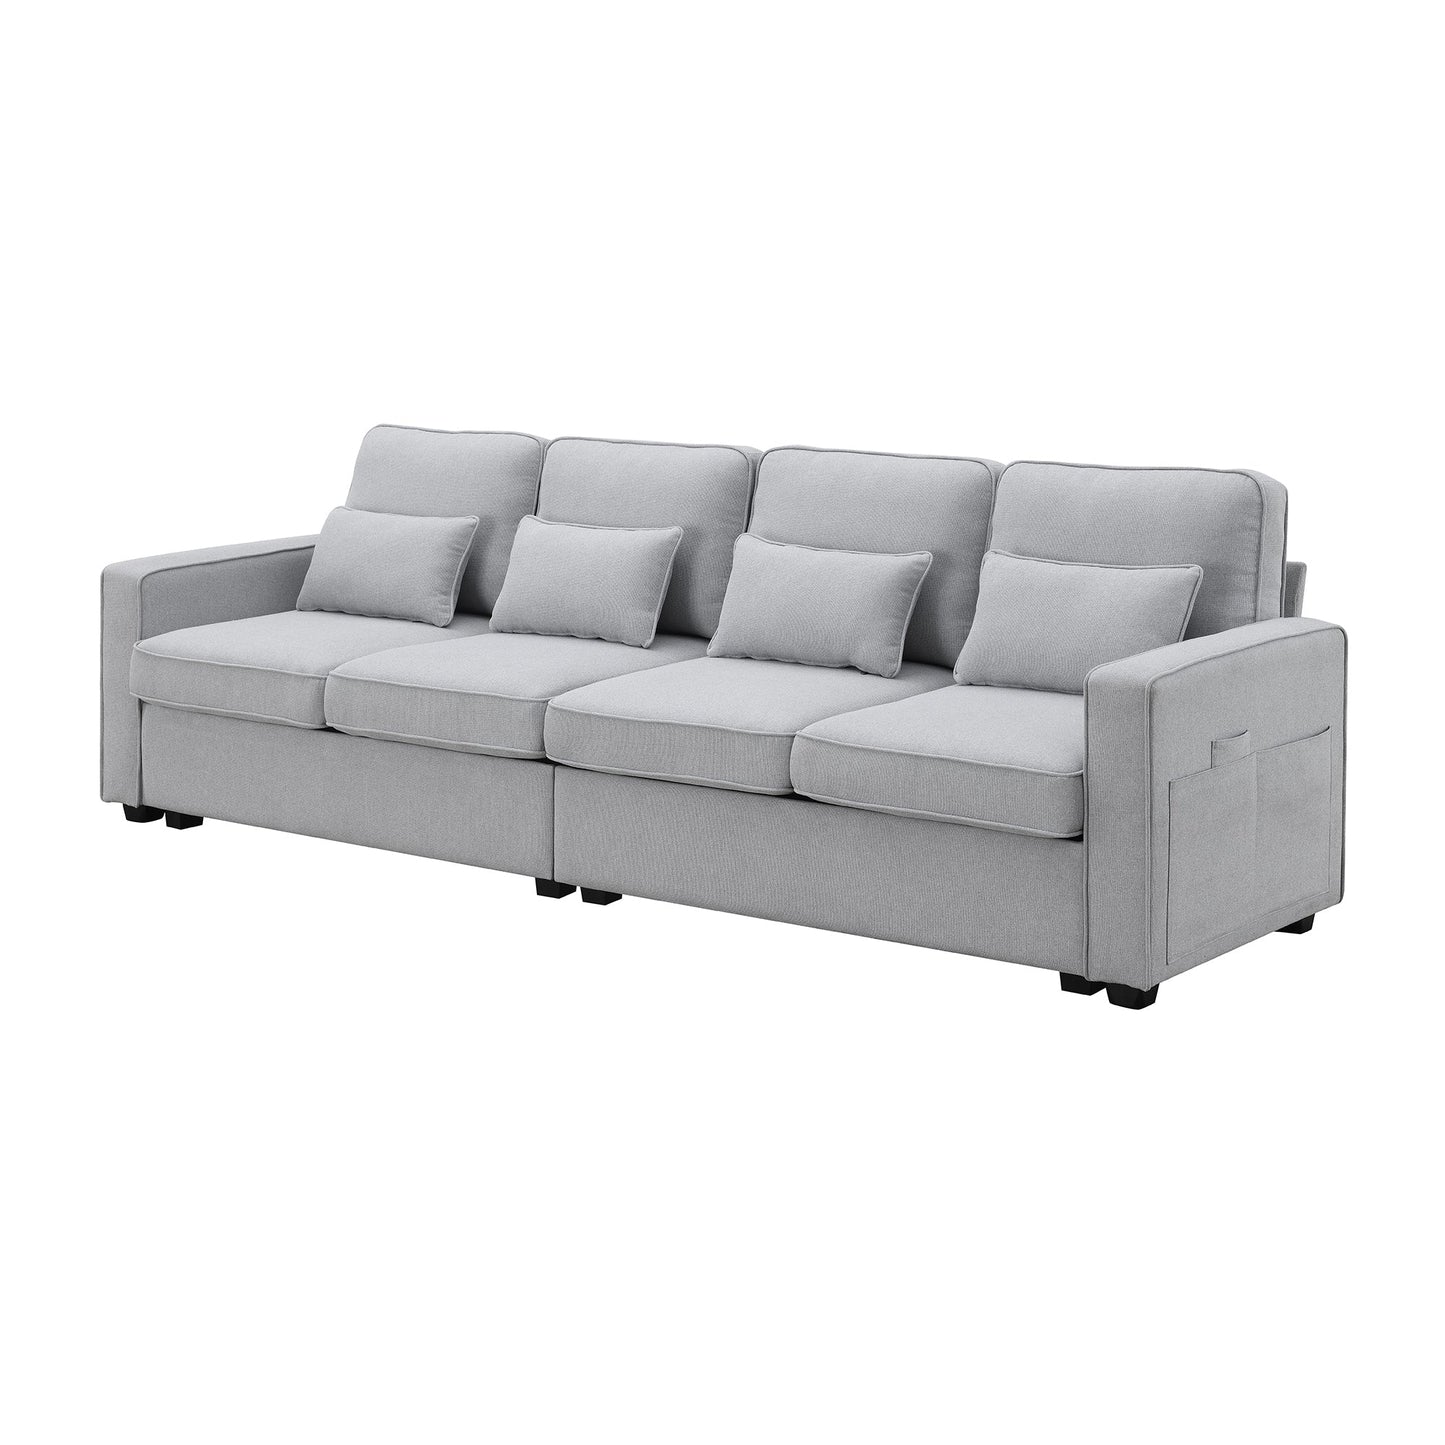 104" 4-Seater Modern Linen Fabric Sofa with Armrest Pockets and 4